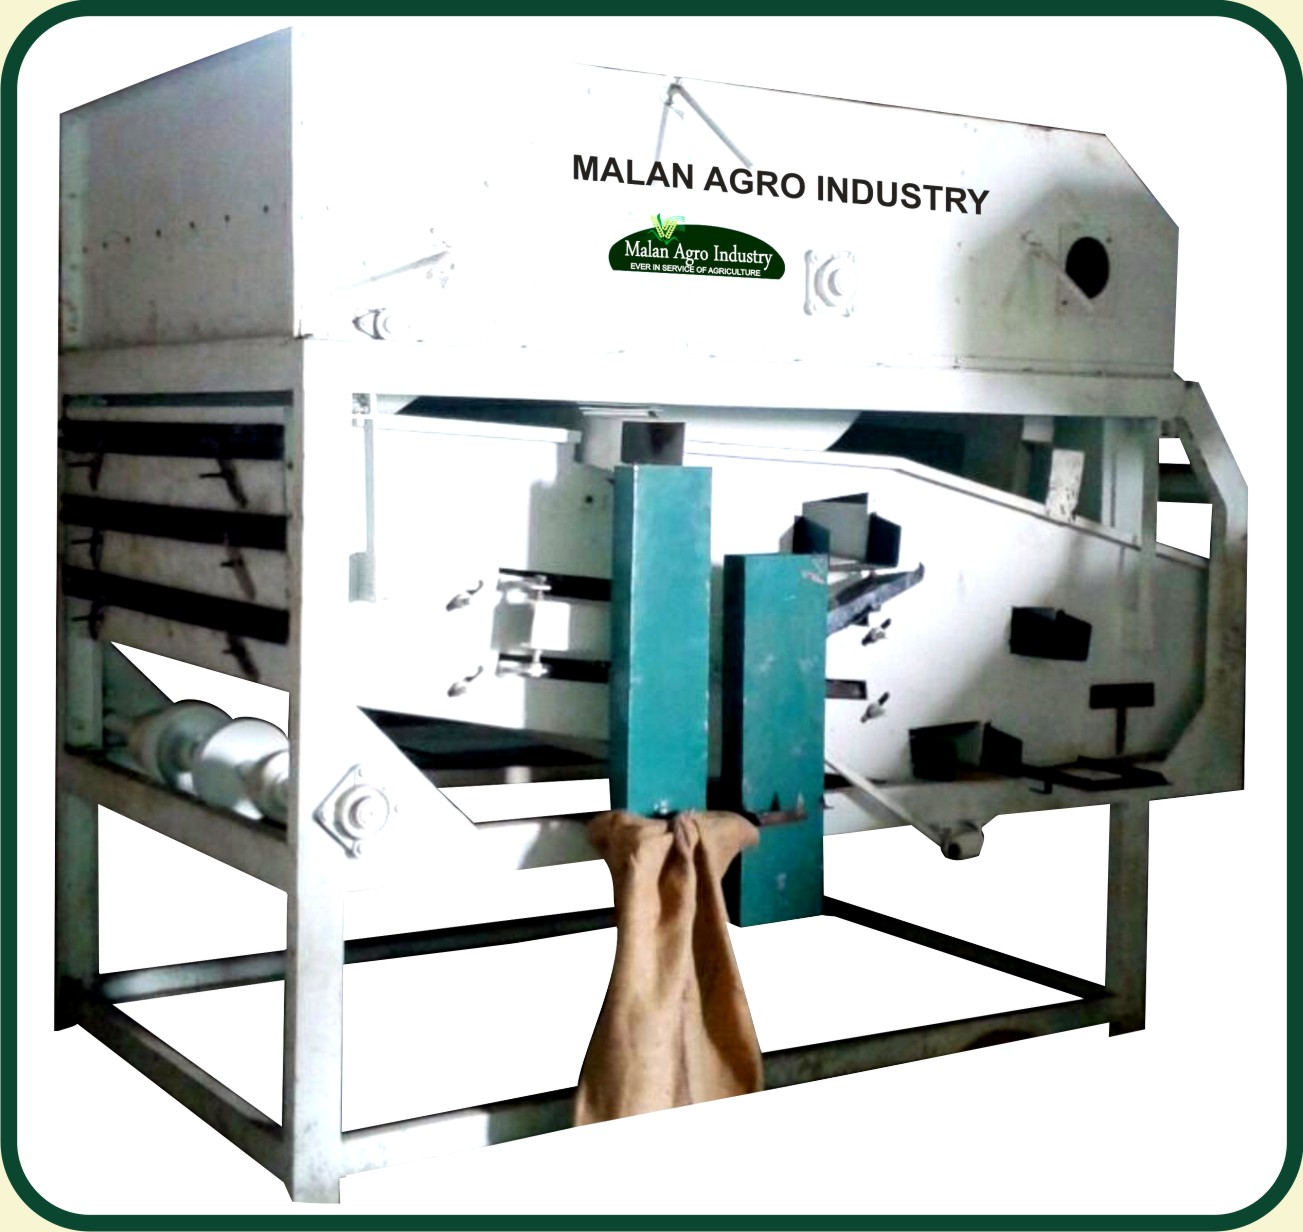 Electric 100-1000kg Seed Grading Machine, Certification : CE Certified, ISO 9001:2008